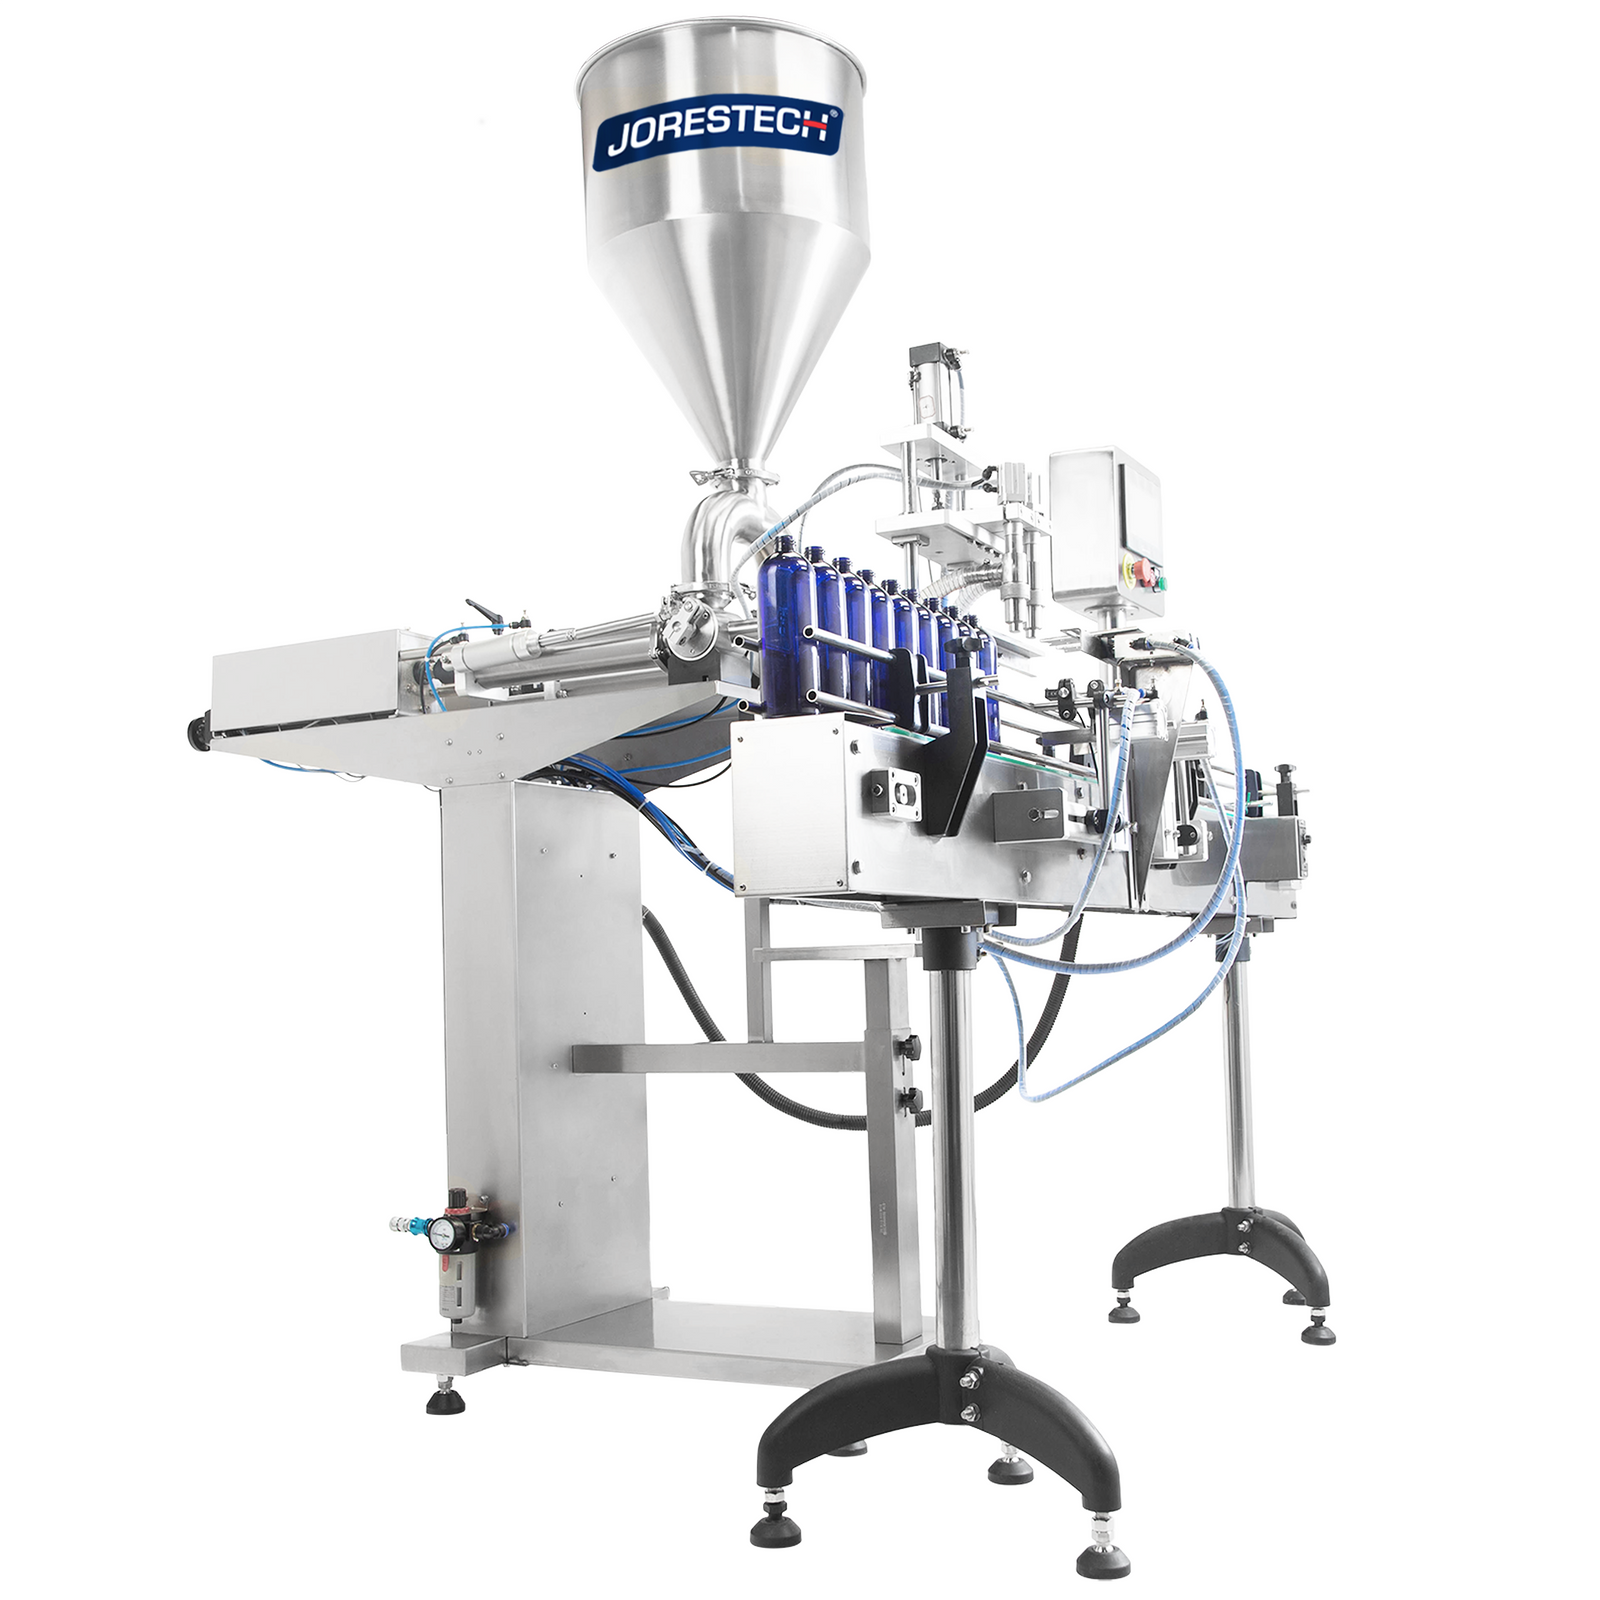 JORES TECHNOLOGIES® automatic 2 head Piston Filler in combination with a motorized conveyor. Blue bottles are positioned on top of the conveyor and are being filled with a liquid